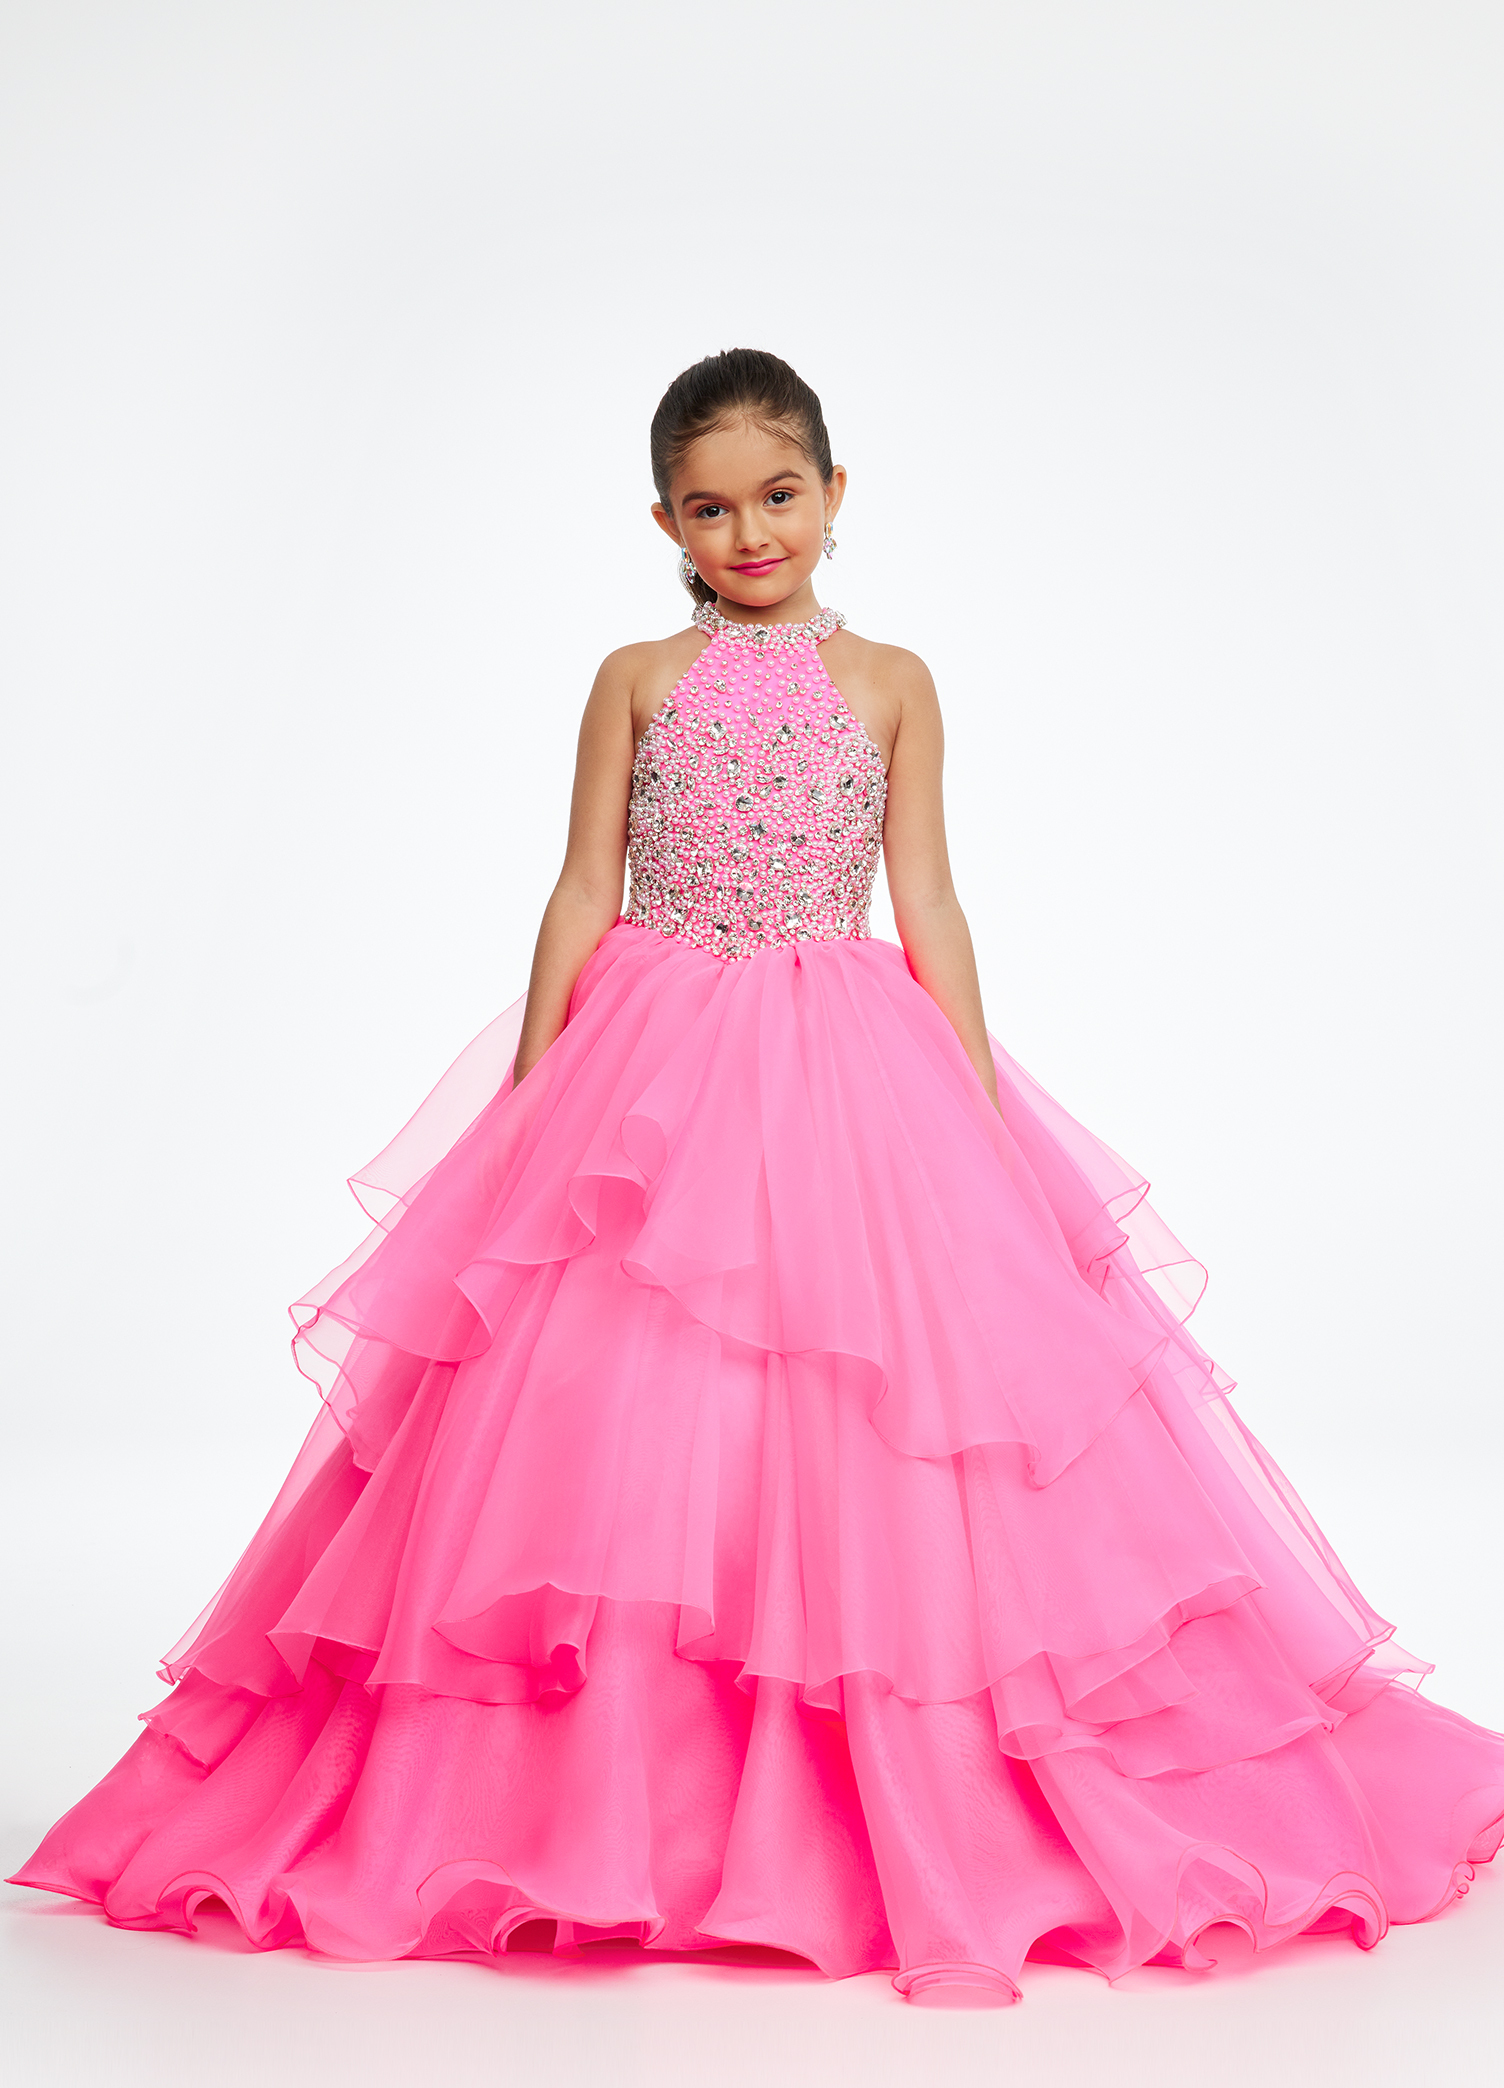 Perfect Winter Pageant Dresses for Teens  David Charleswear